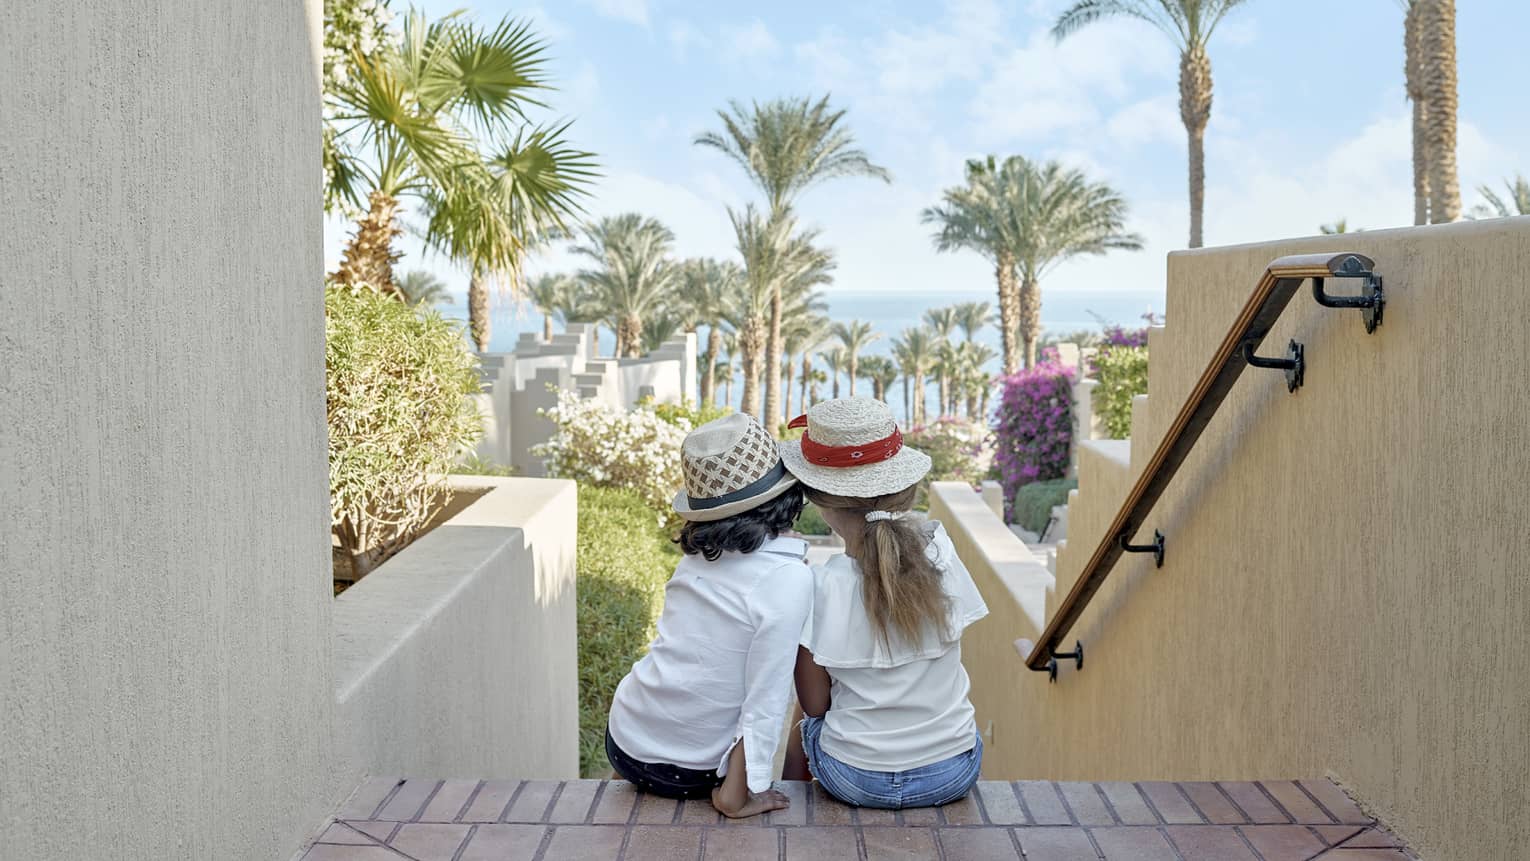 Two young girls sit on stairs looking out to resort grounds with palm trees